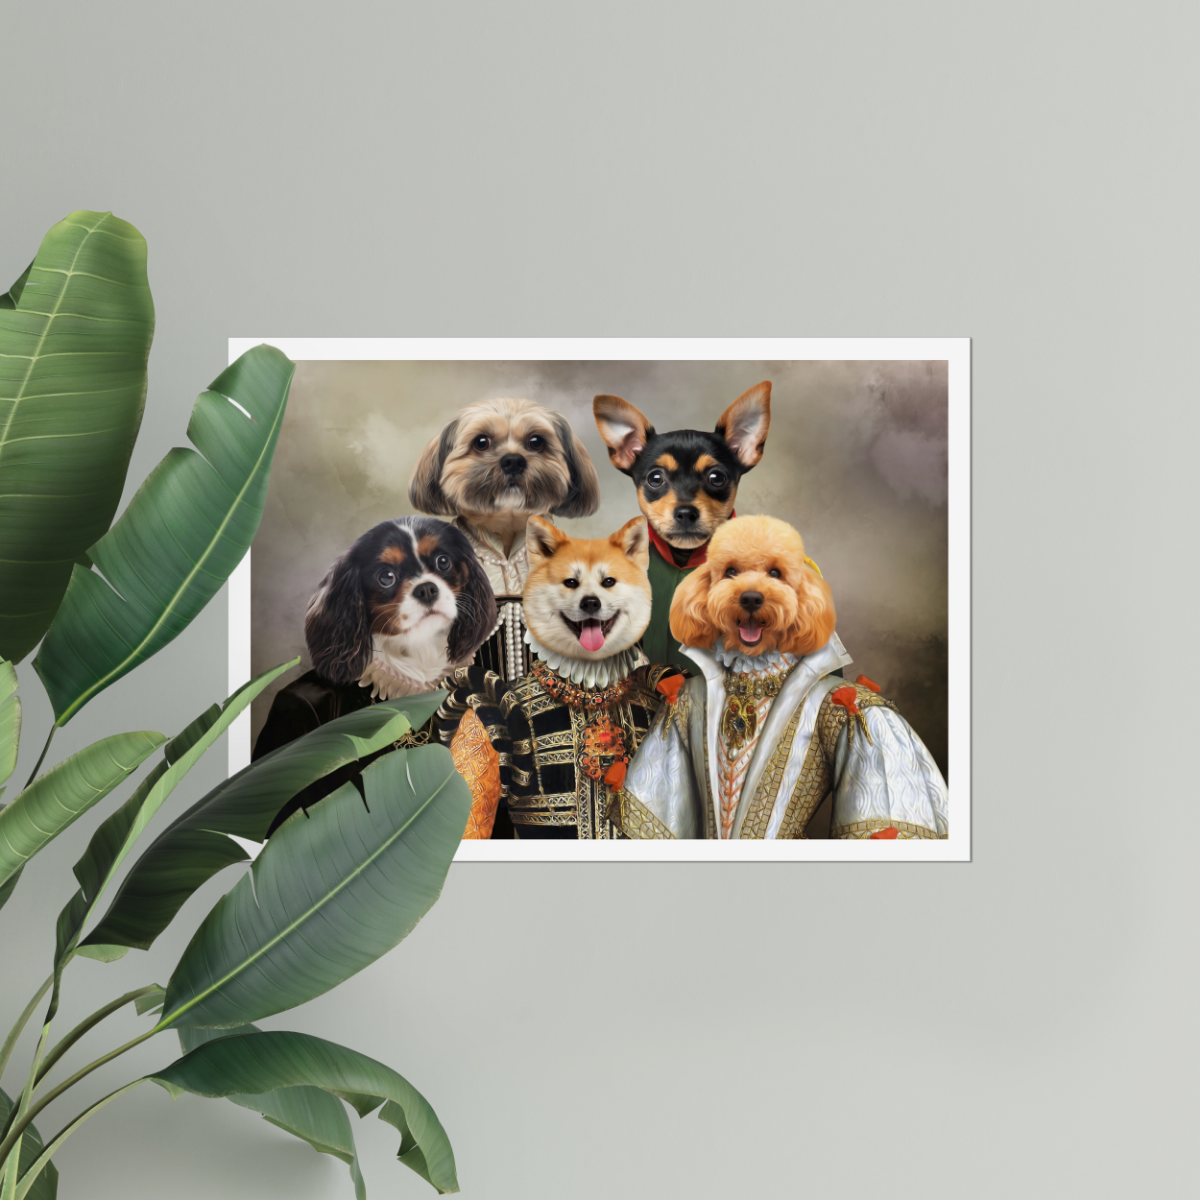 The Dignified 5: Custom Pet Poster - Paw & Glory - #pet portraits# - #dog portraits# - #pet portraits uk#Paw & Glory, paw and glory, pet pawtraits online personalised pet art, cat royalty painting pet portrait photography, dog renaissance painting, renaissance pet portraits uk pet portraits